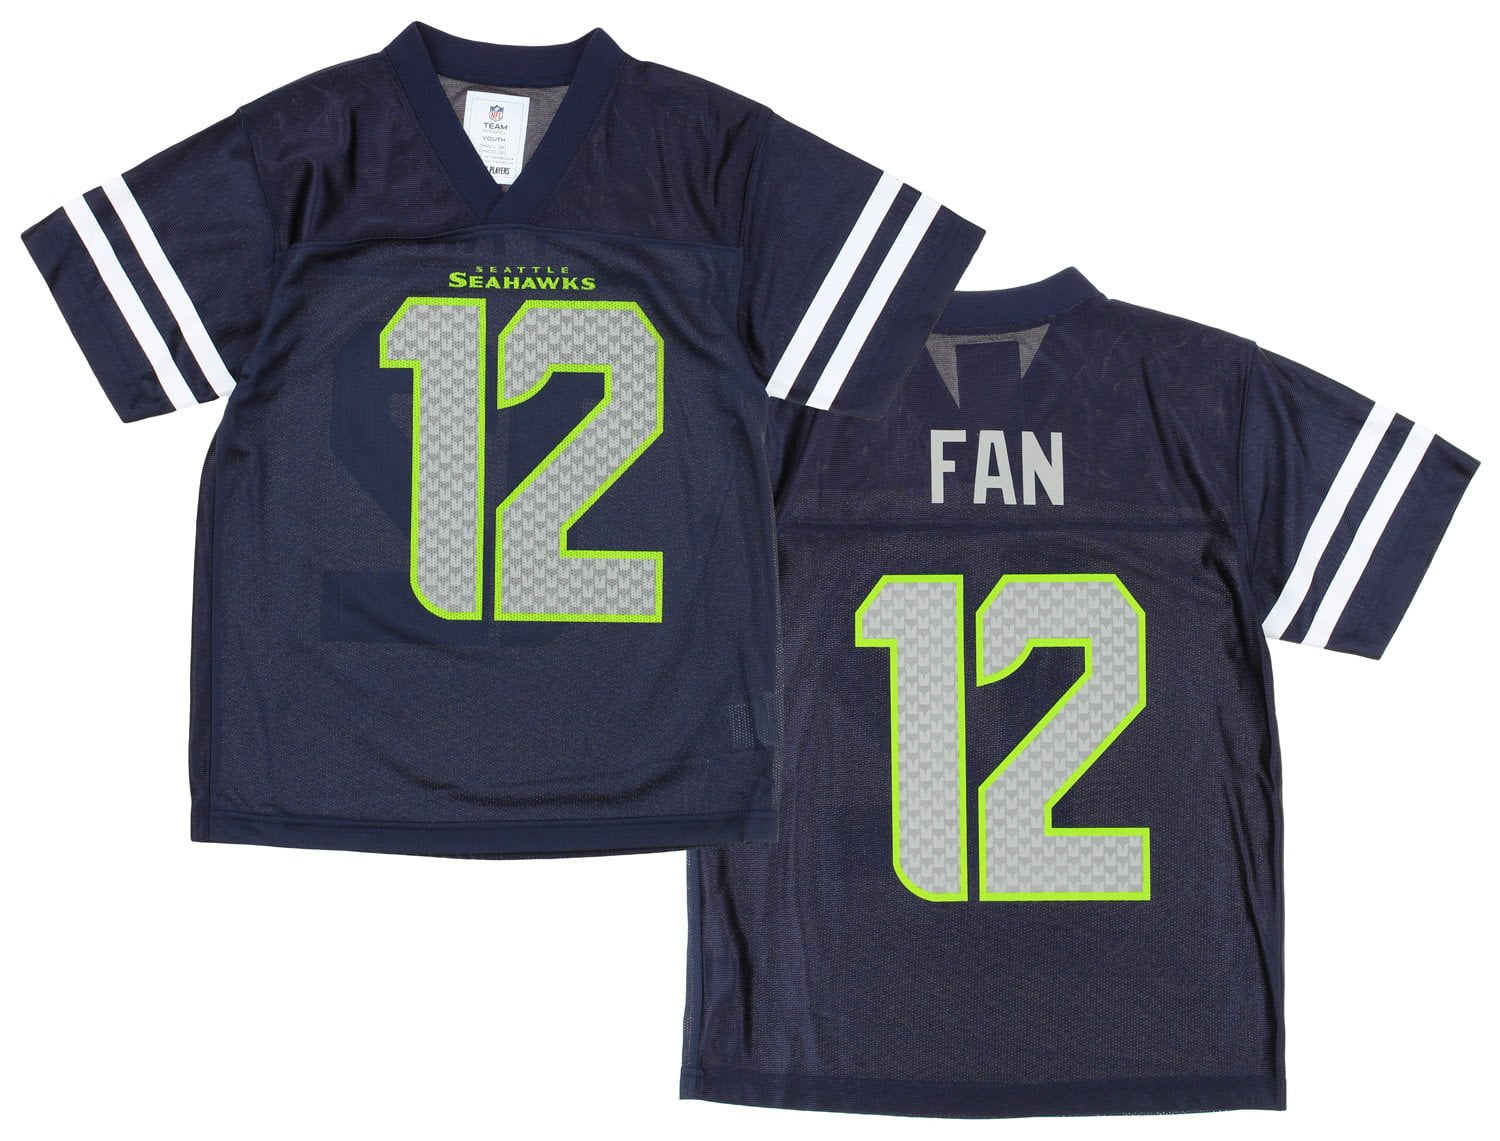 Russell Wilson Seattle Seahawks #3 White Dazzle Girls Youth Jersey 